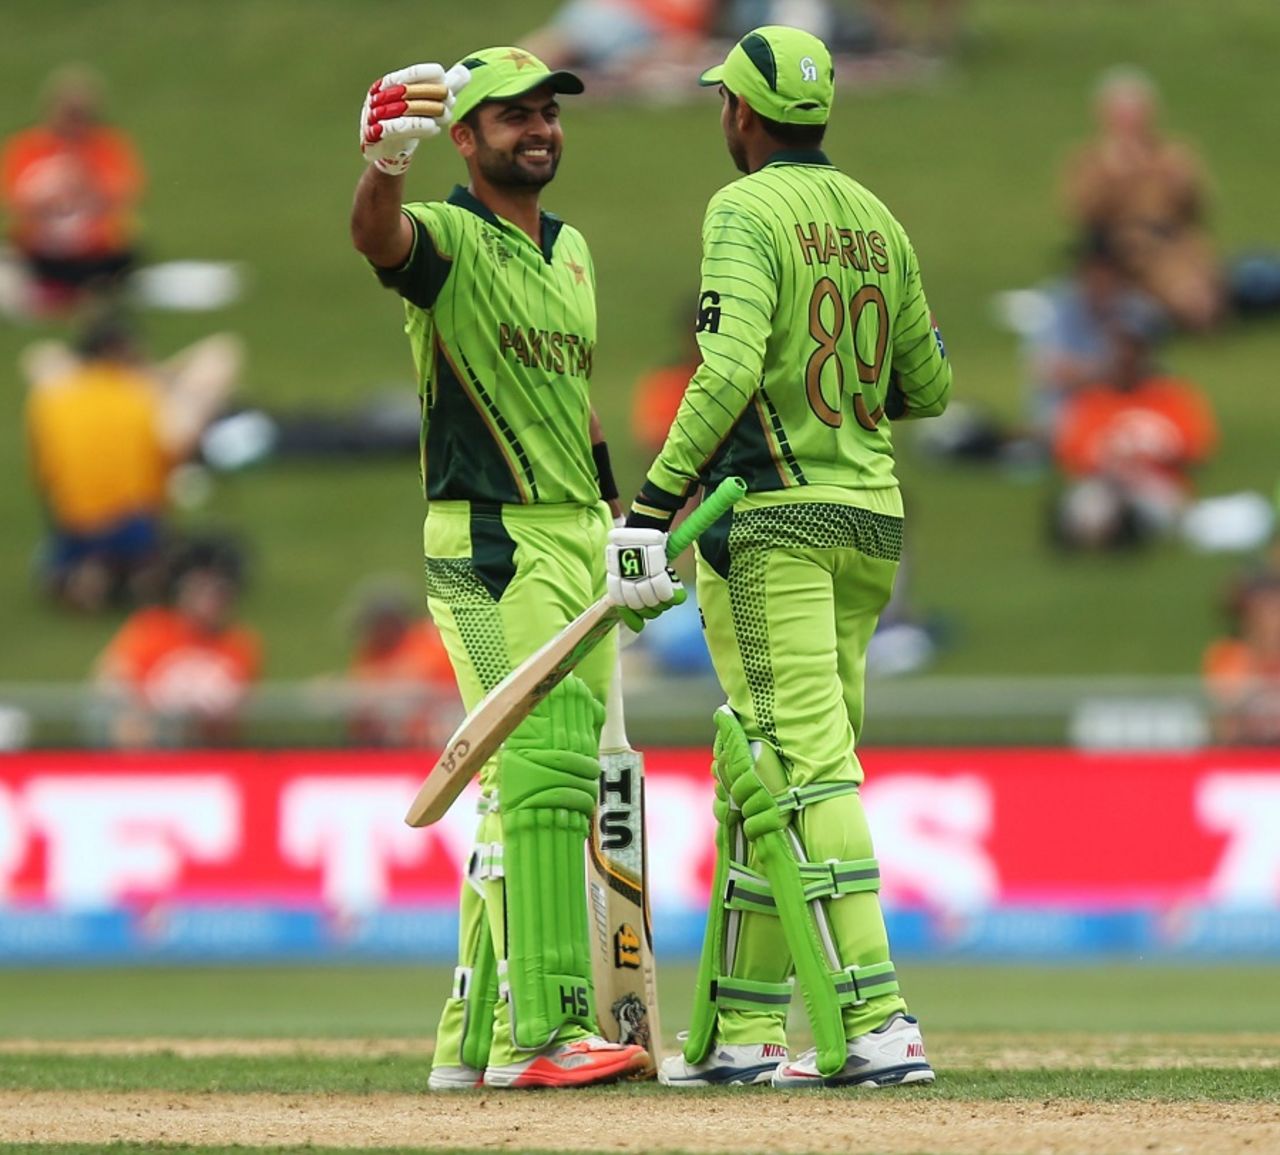 Ahmed Shehzad and Haris Sohail added 160 together, Pakistan v UAE, World Cup 2015, Group B, Napier, March 4, 2015